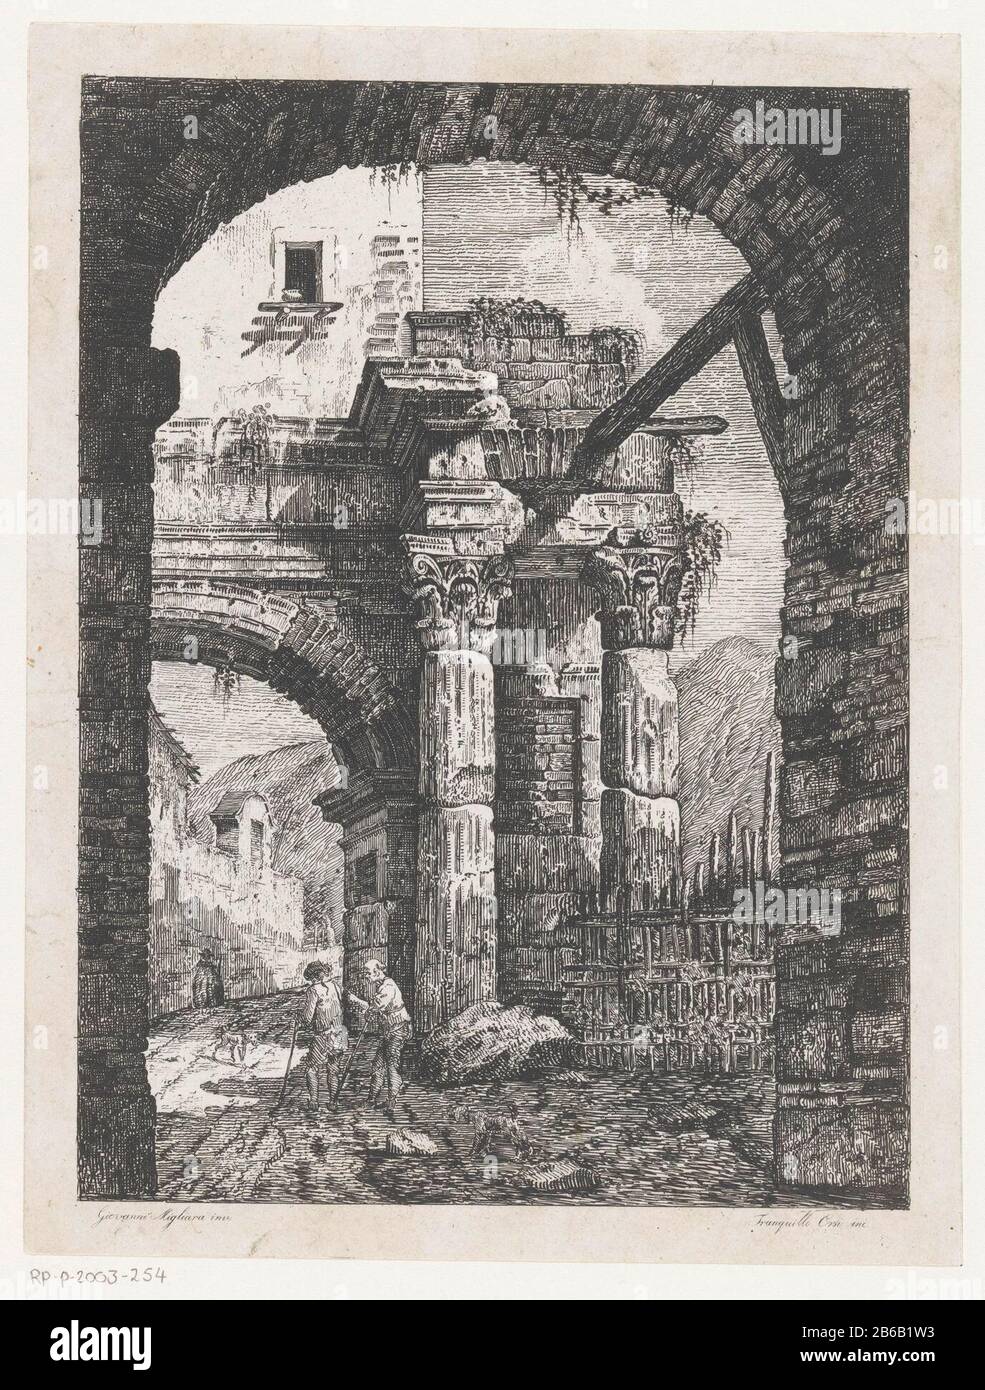 Ruins of an ancient port Corinthian columns. On the path through the gate two hikers walking with two dogs. In the background a mountainous landscape. The whole is framed by a second port on the voorgrond. Manufacturer : printmaker: Tranquillo Orsi (listed building), designed by Giovanni Migliara (listed property) Place manufacture: Italy Date: 1795 - approx 1845 Physical features: etching material: paper Technique : etching dimensions: sheet: h 276 mm (Inner cut plate edge.) × W 211 mm (Inner cut plate edge.)  Subject: landscape with ruins'en route, travelers under wayCorinthian order  archi Stock Photo